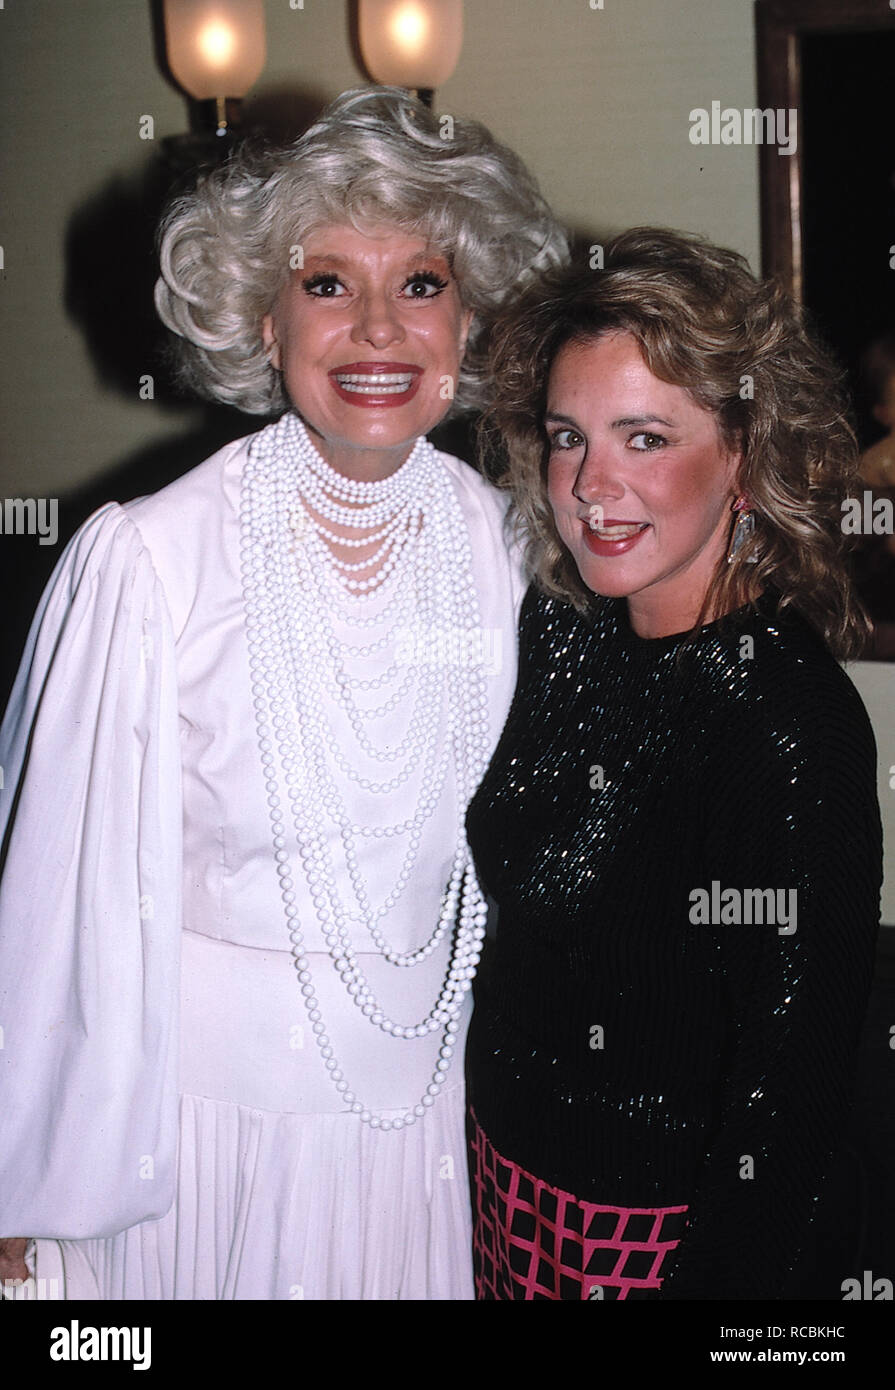 Is stockard channing related to carol channing